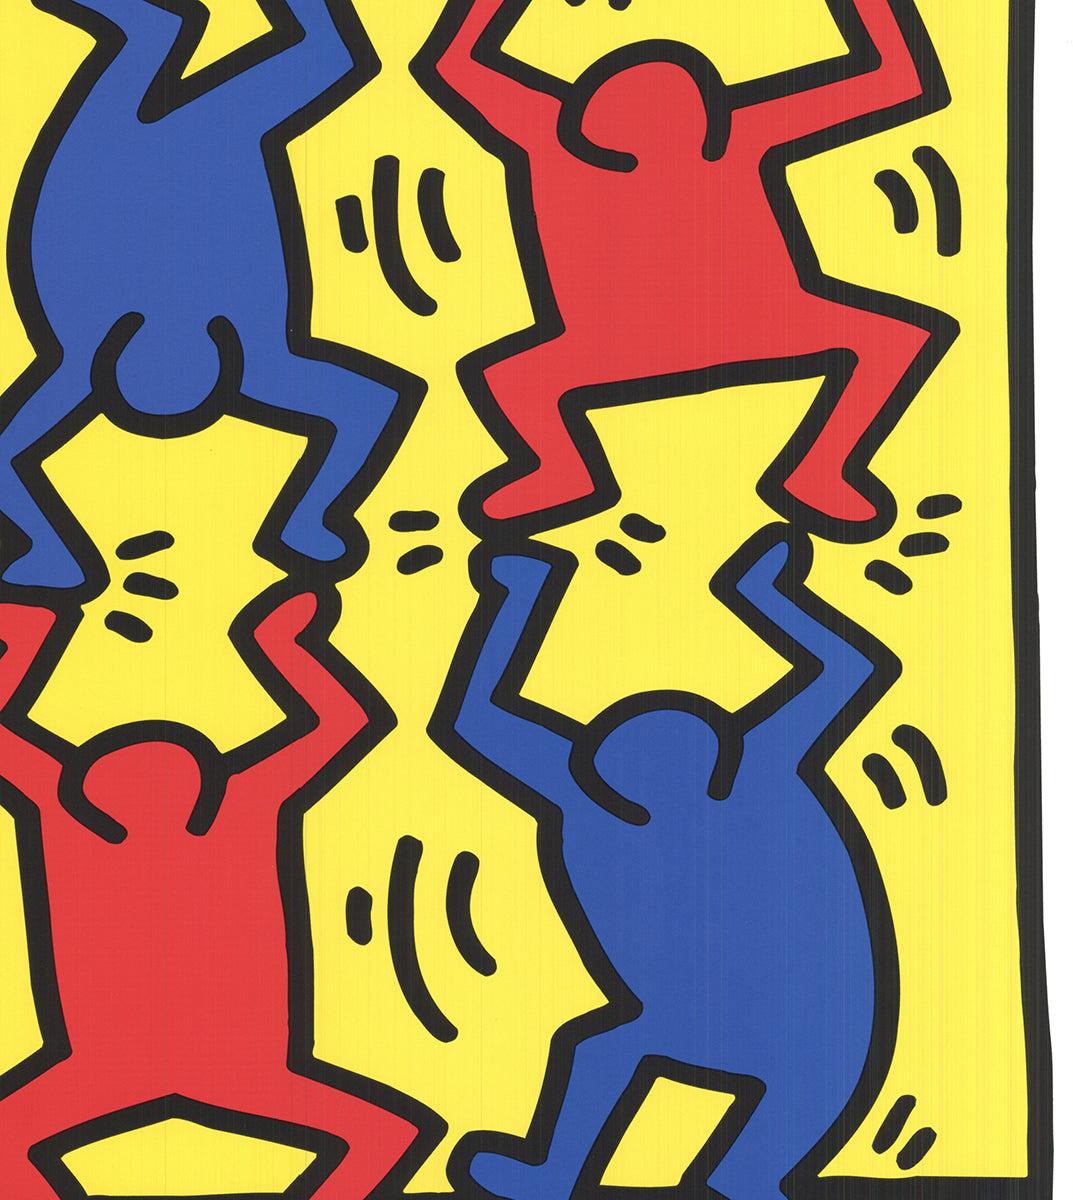 Keith Haring 'Untitled, 1988' 2008- Lithographie offset en vente 3